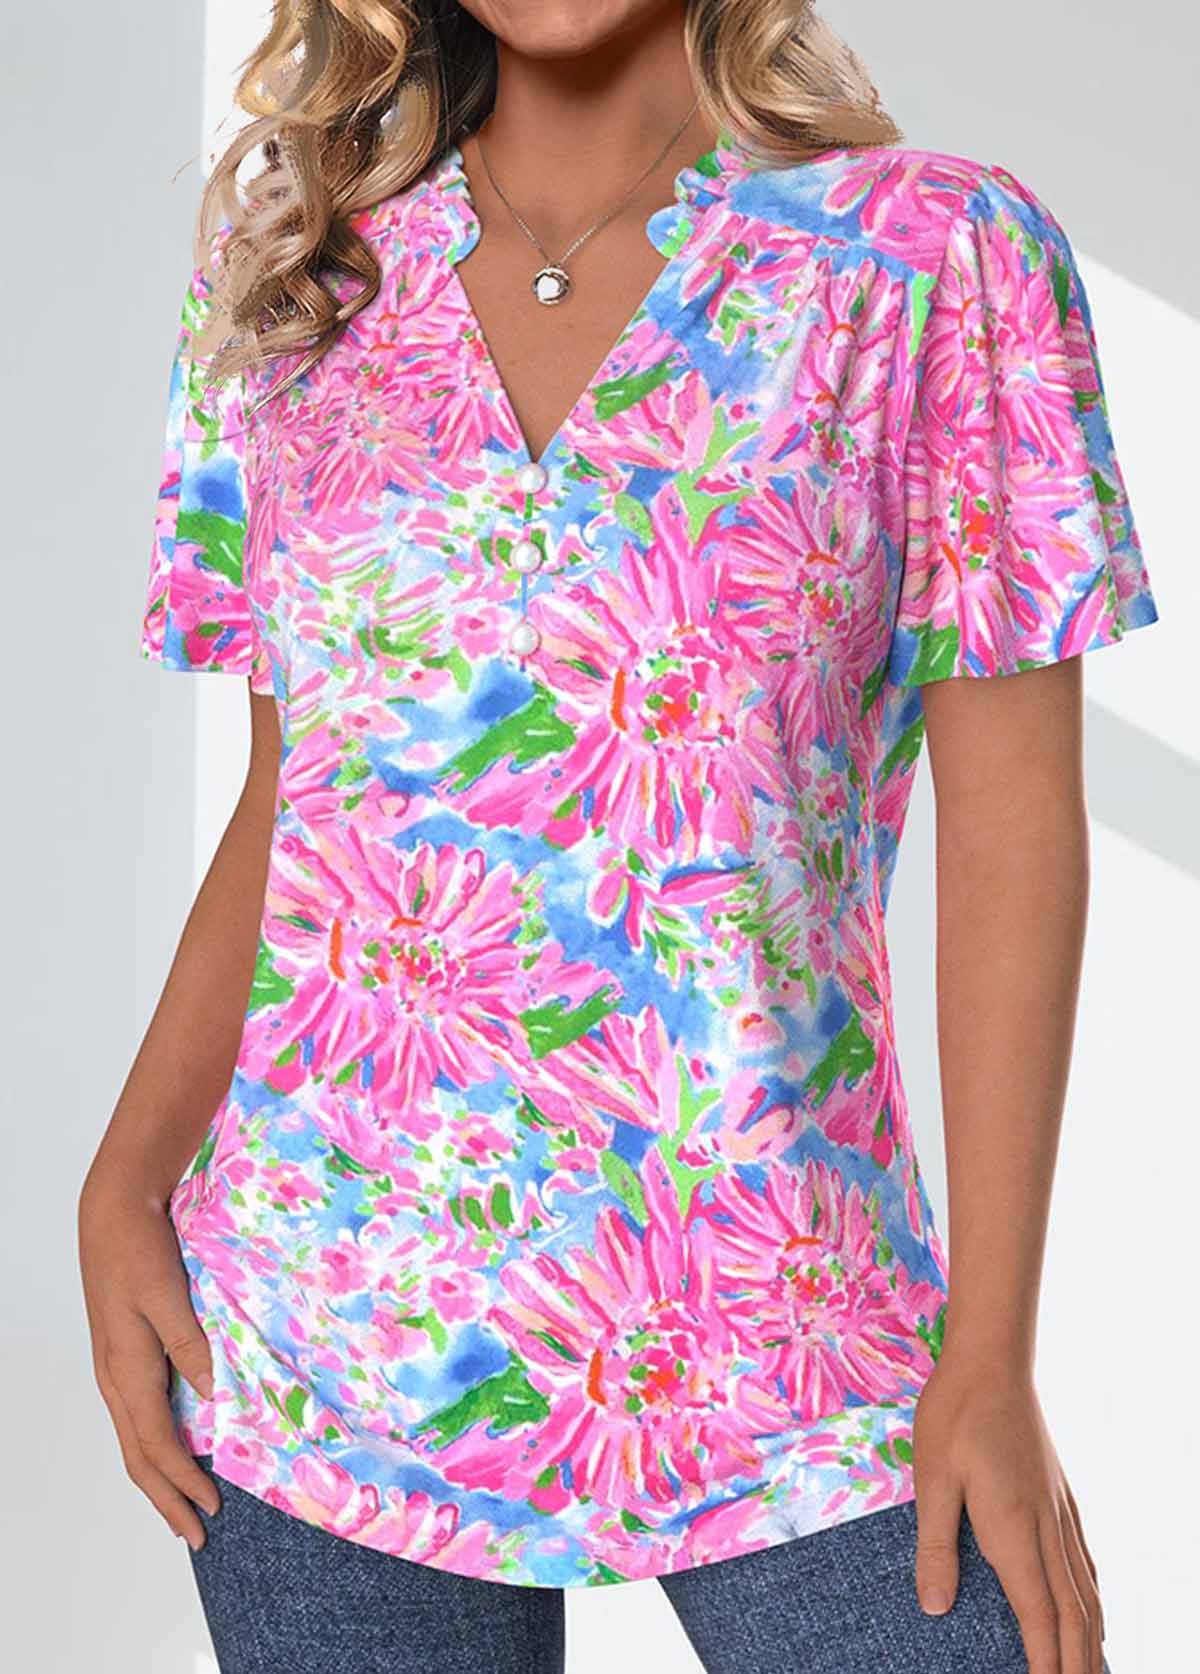 Floral Print Frill Neon Pink Short Sleeve Blouse